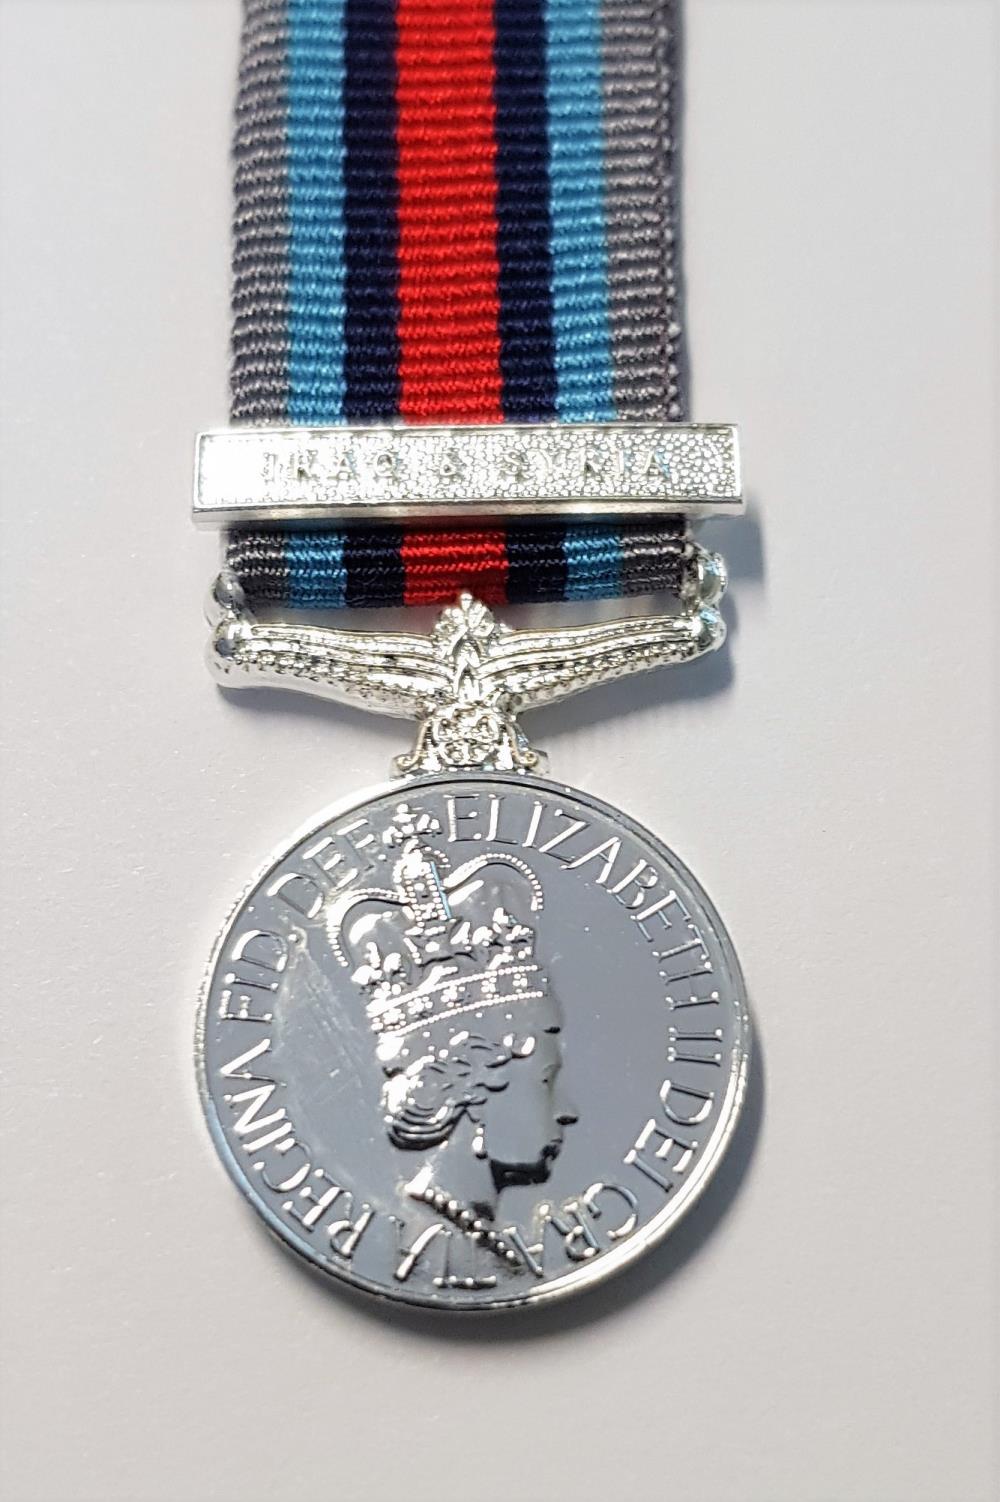 OSM with clasp Iraq & Syria (Op Shader) Miniature Medal